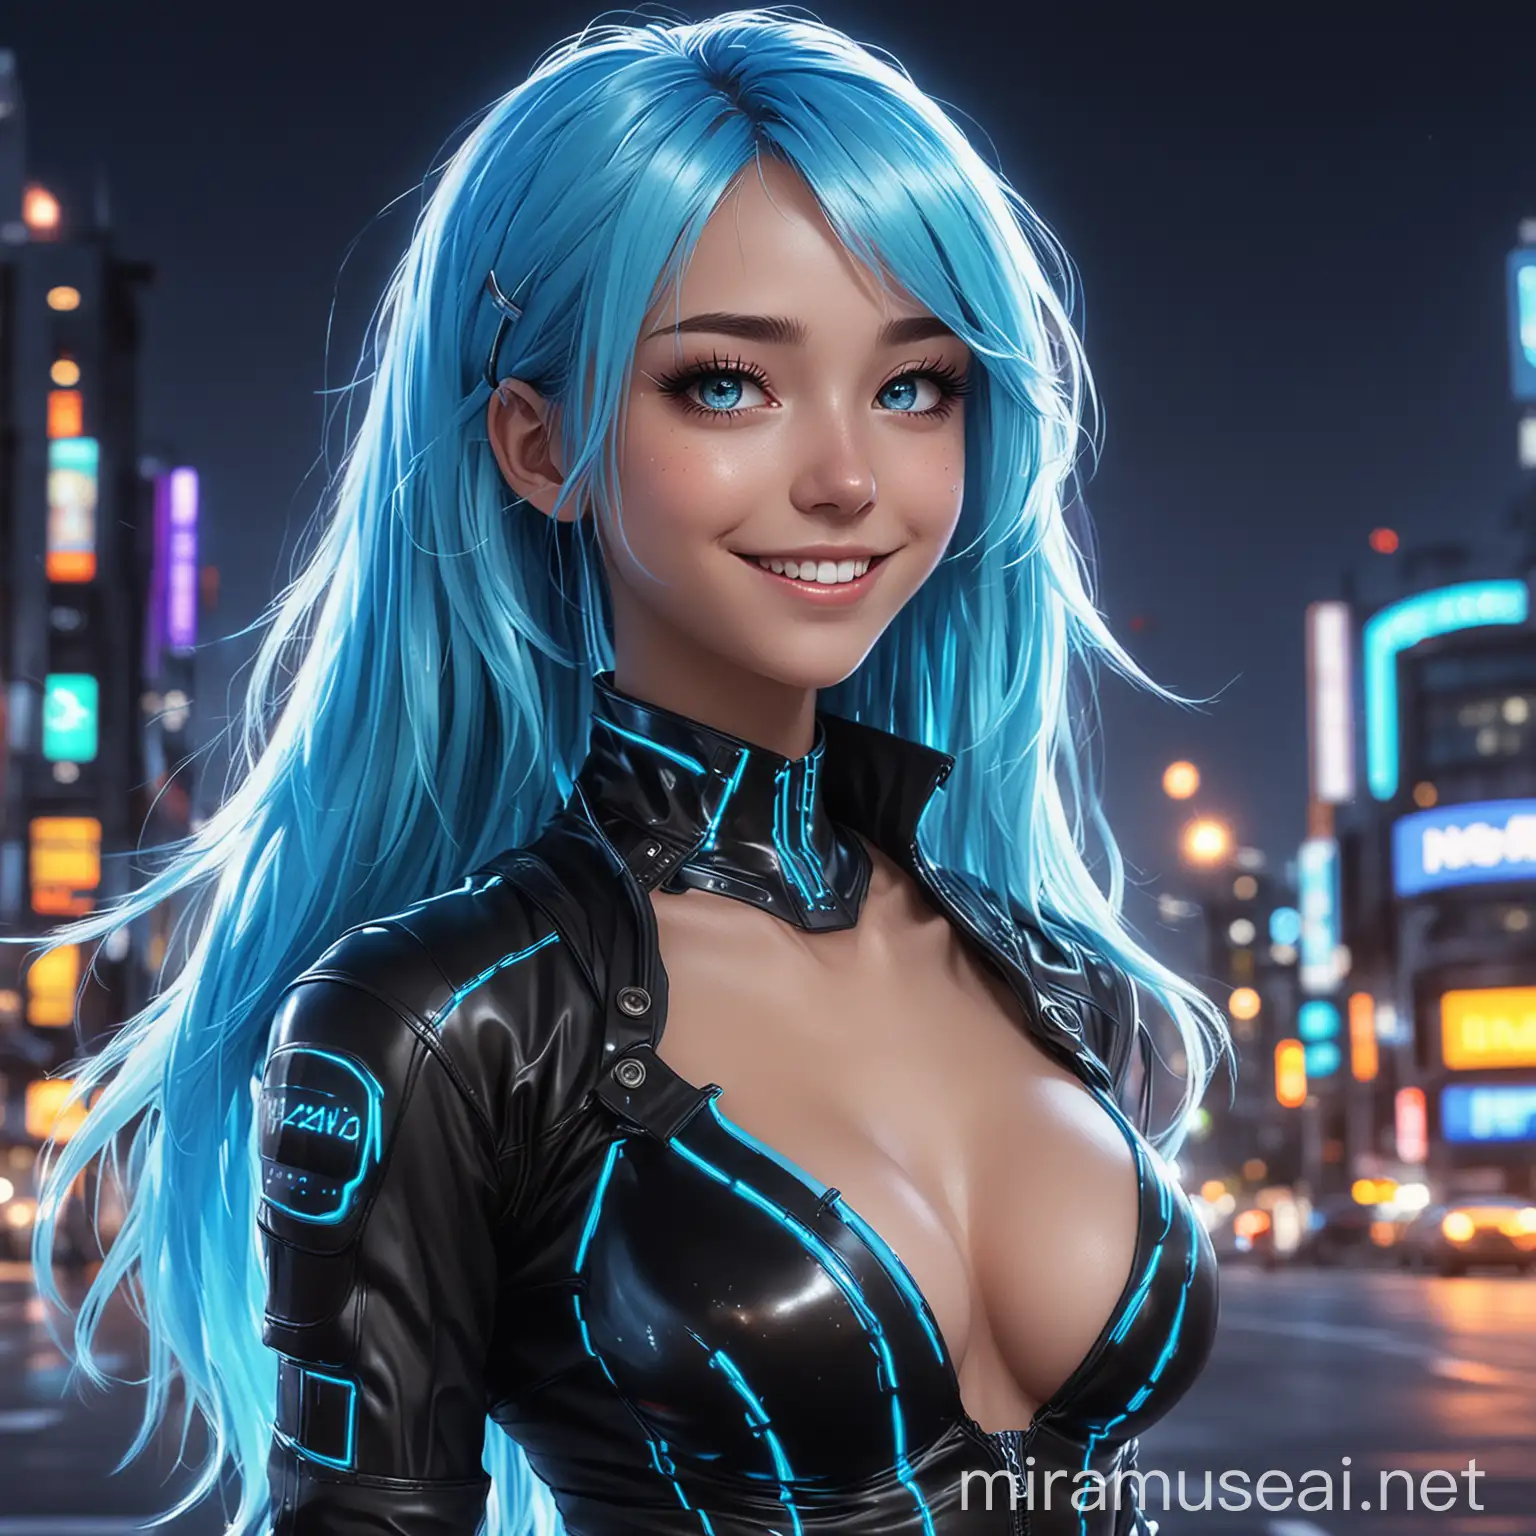 Smiling anime girl, long neon blue hair, wearing black tron suit with neon blue lights, cleavage, Futuristic neon blue light city, blurry background, anime wallpapers ltg xhg ltg, in the style of digital neon, speedpainting, cyan and black, hyper-realistic pop, cryptopunk, detailed character illustrations, rounded, starring directly into the camera with a smile